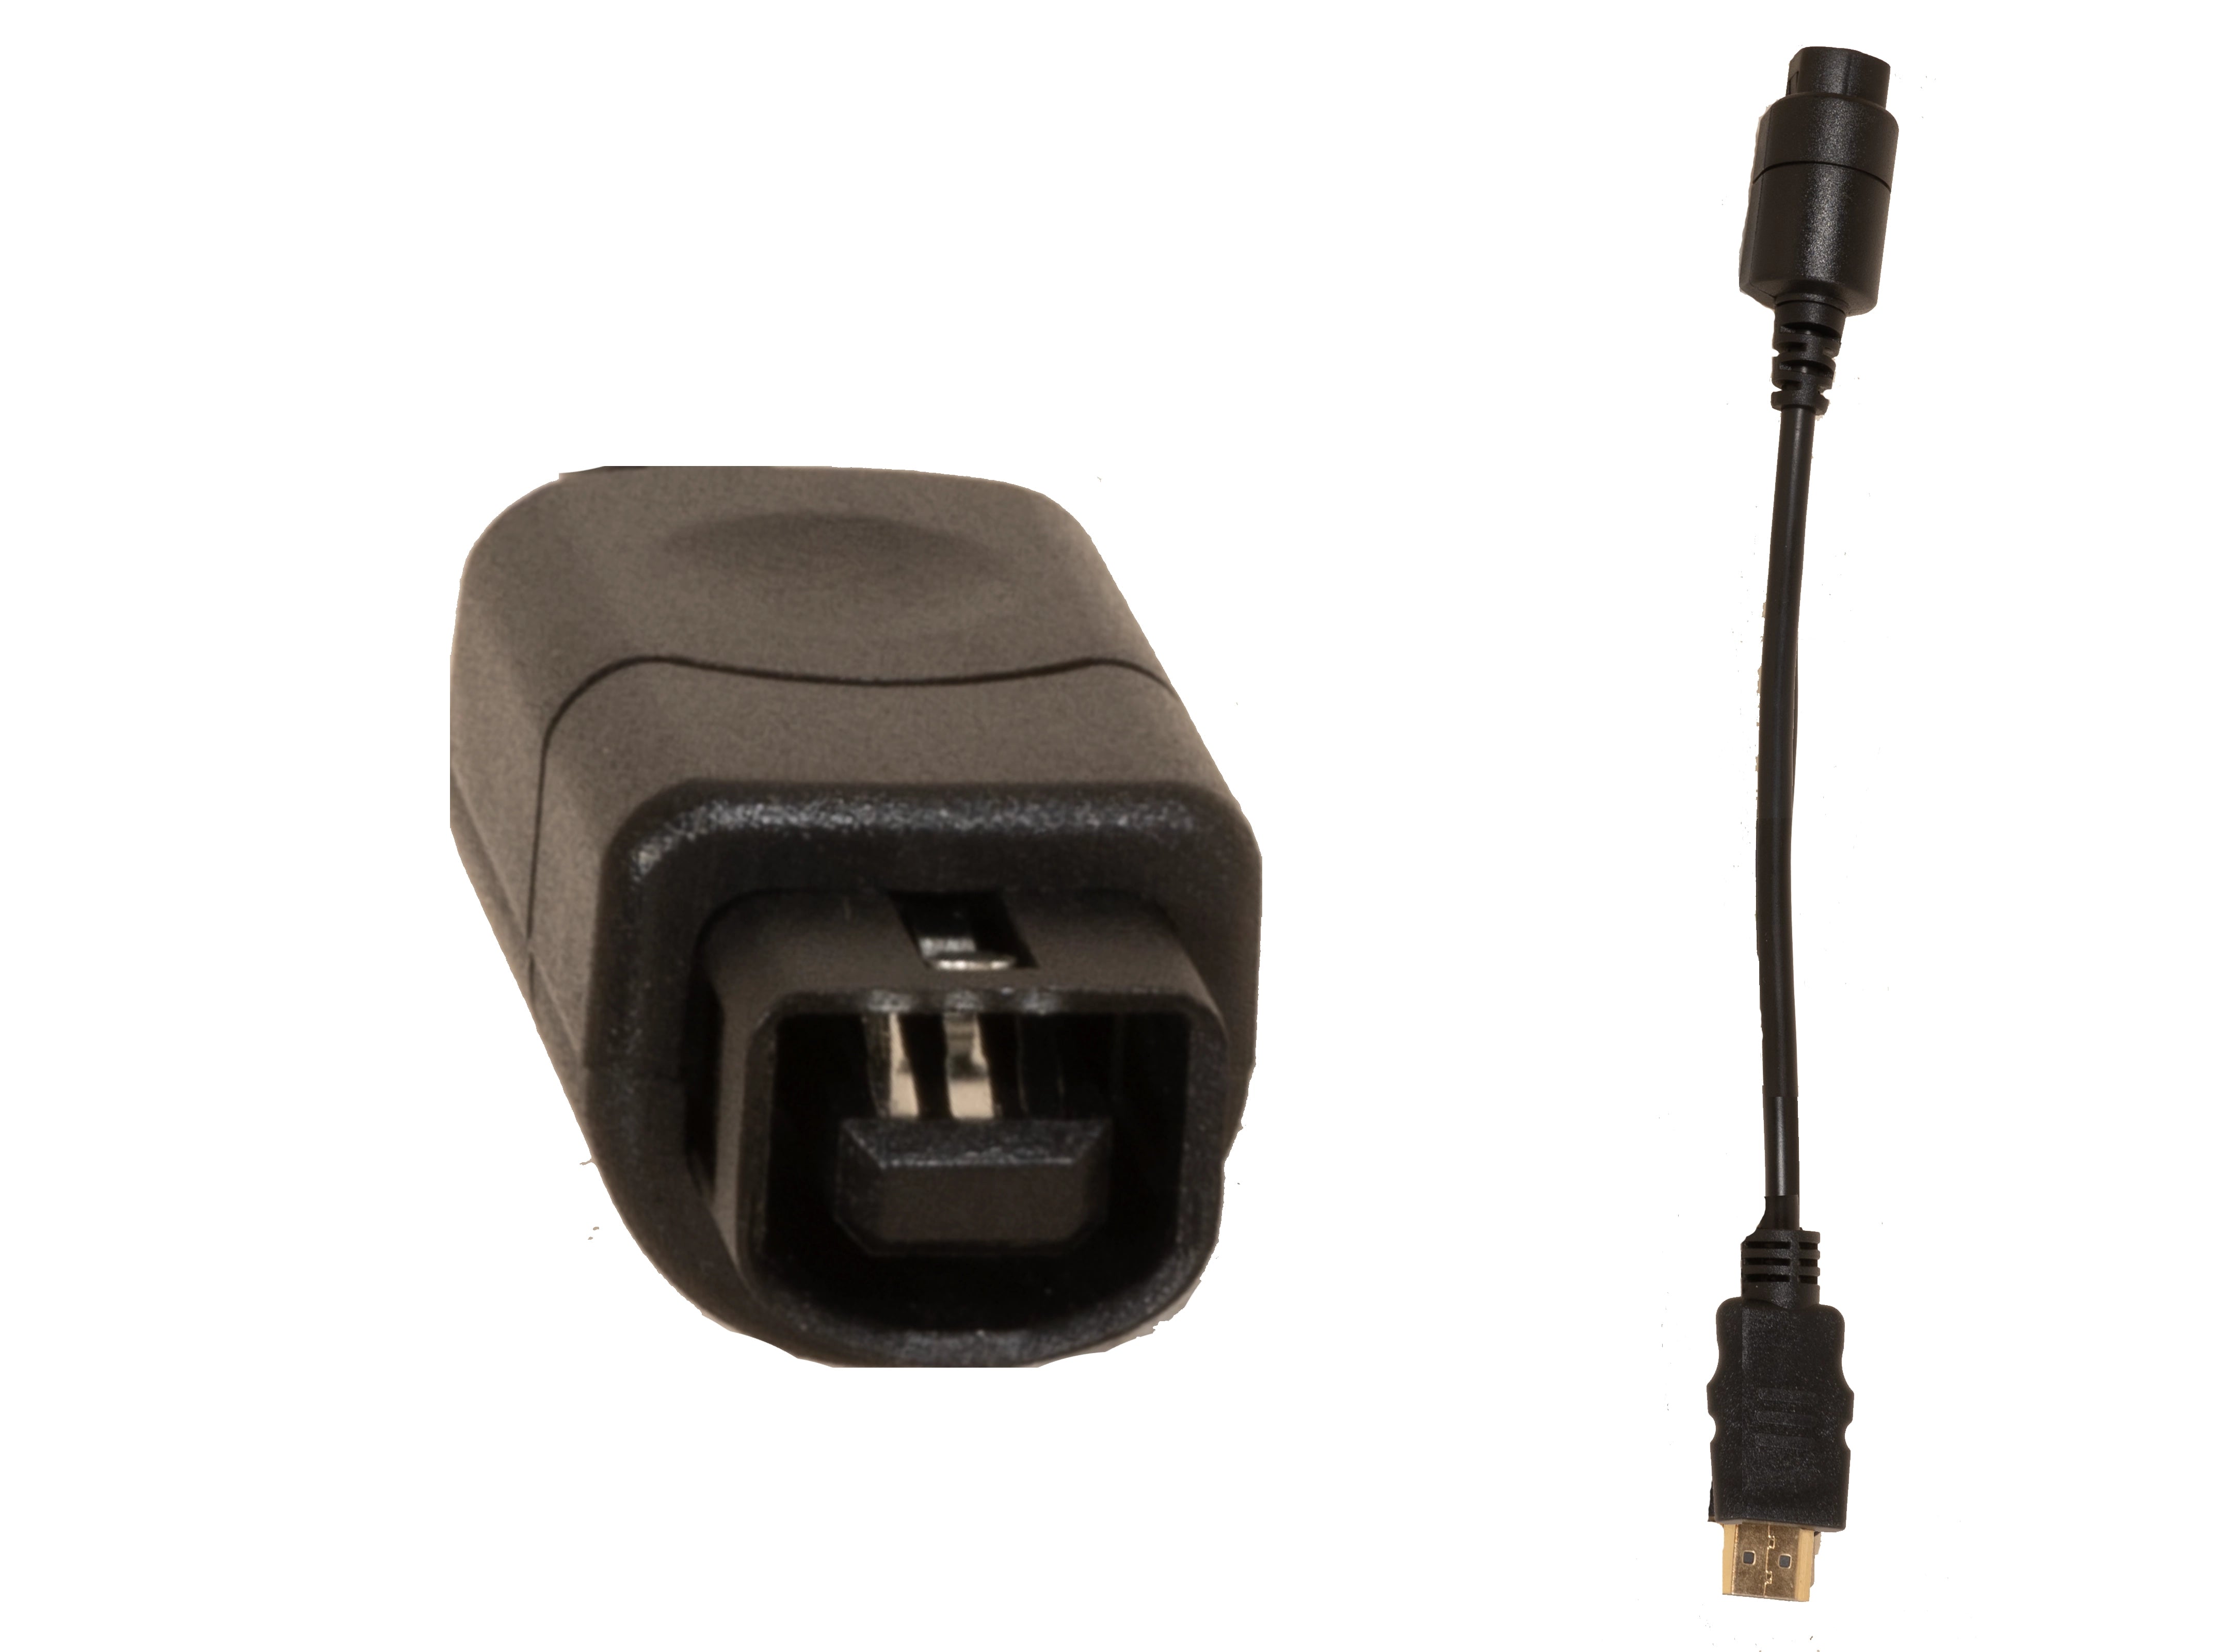 Adapter Cable (AKA SNAC cable) - Misc device